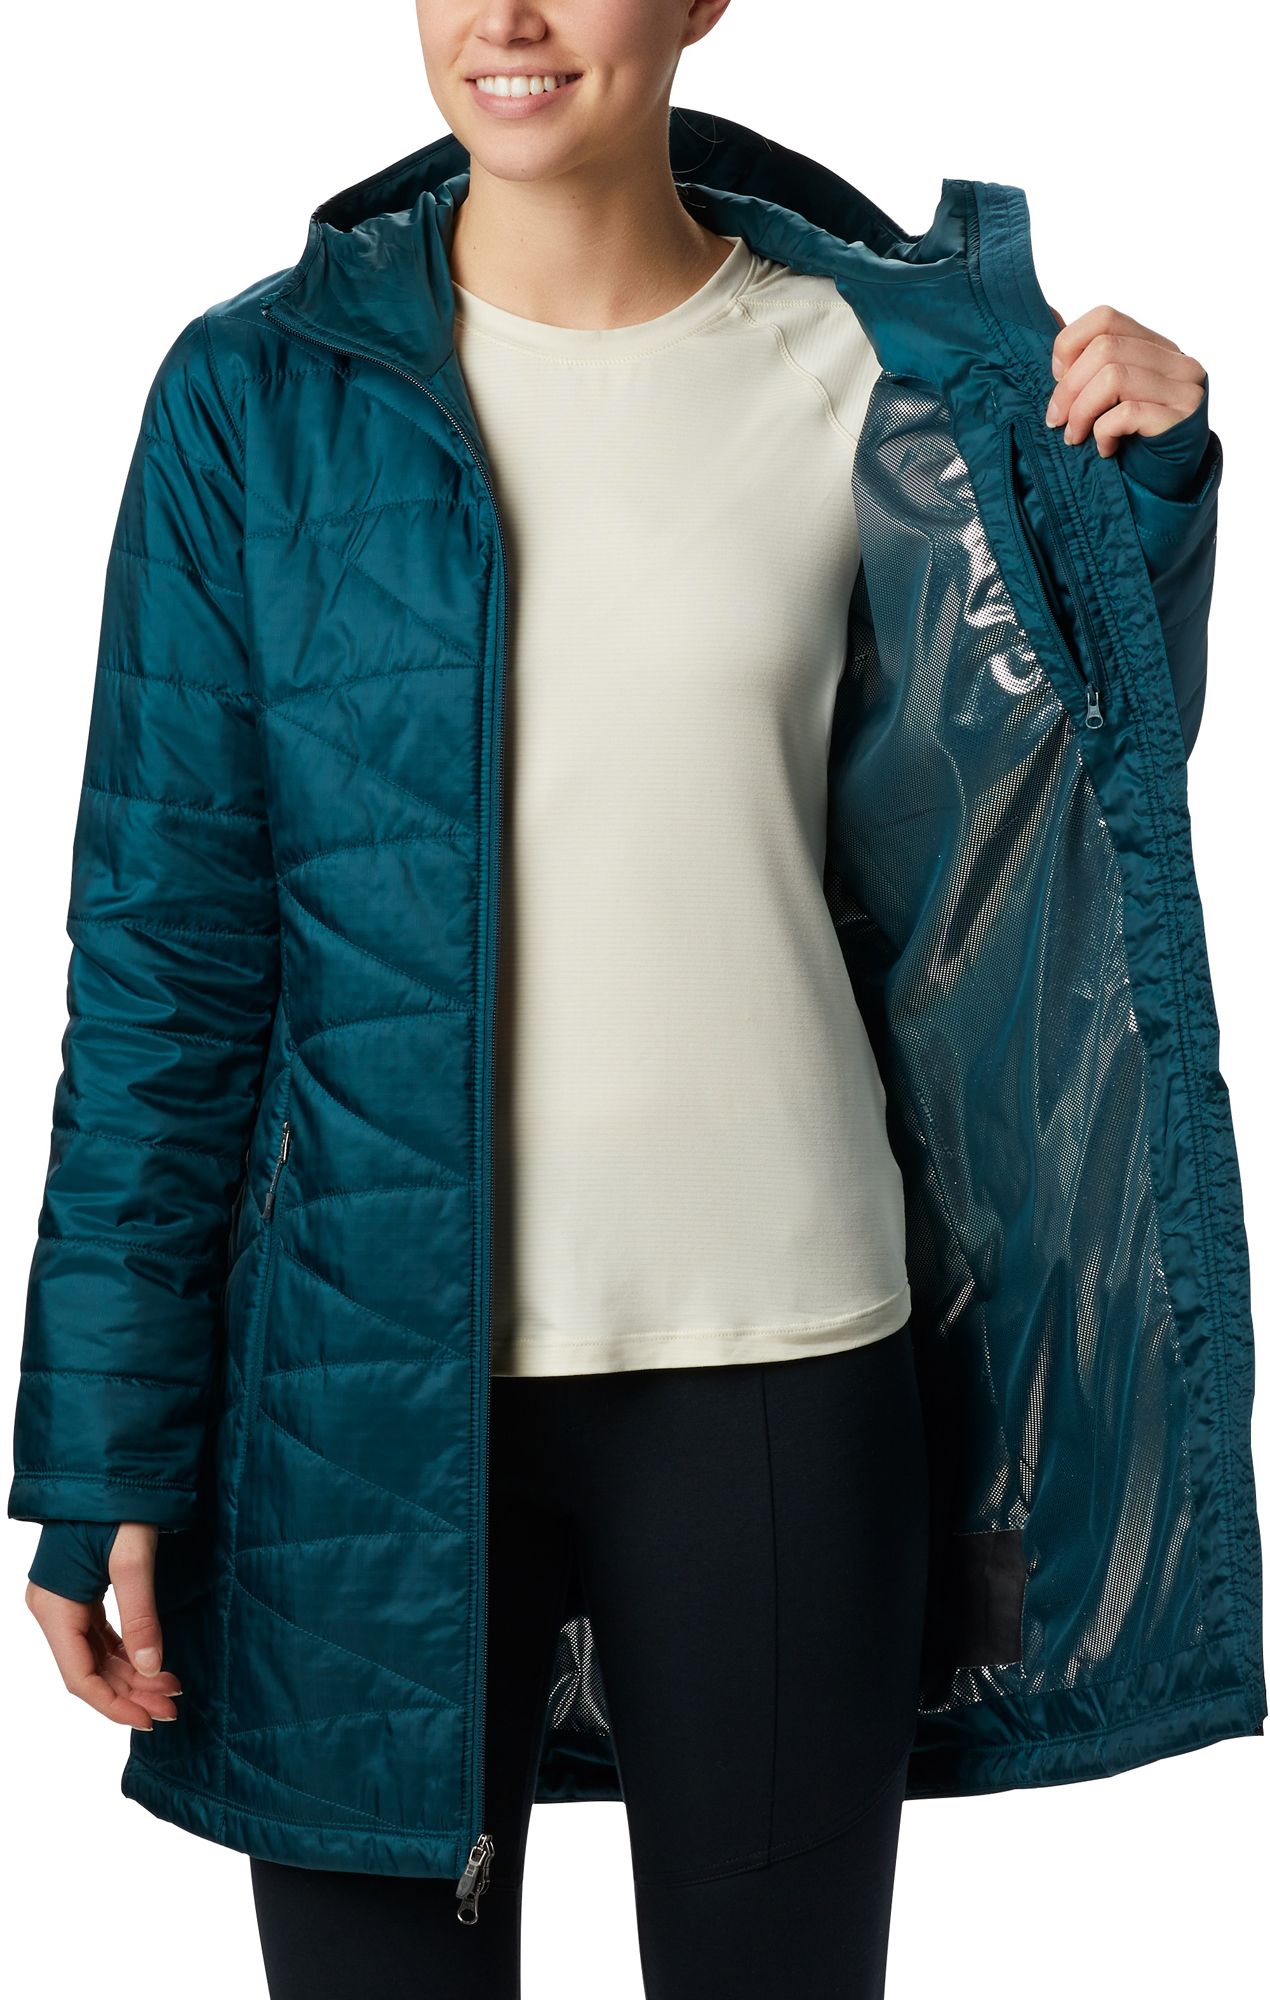 columbia jacket womens mighty lite